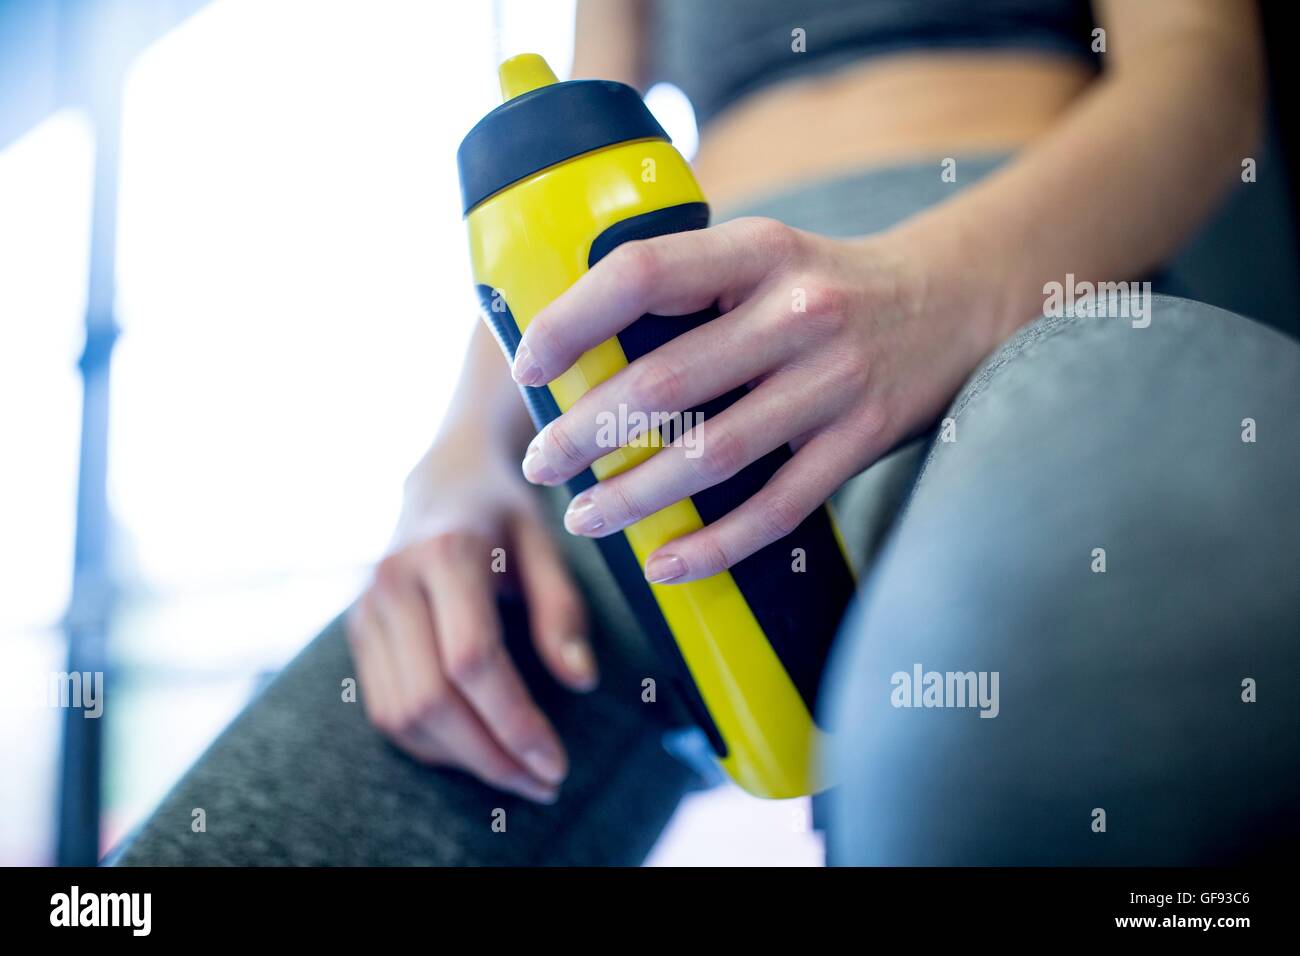 PROPERTY RELEASED. MODEL RELEASED. Woman holding water bottle in gym, close-up. Stock Photo